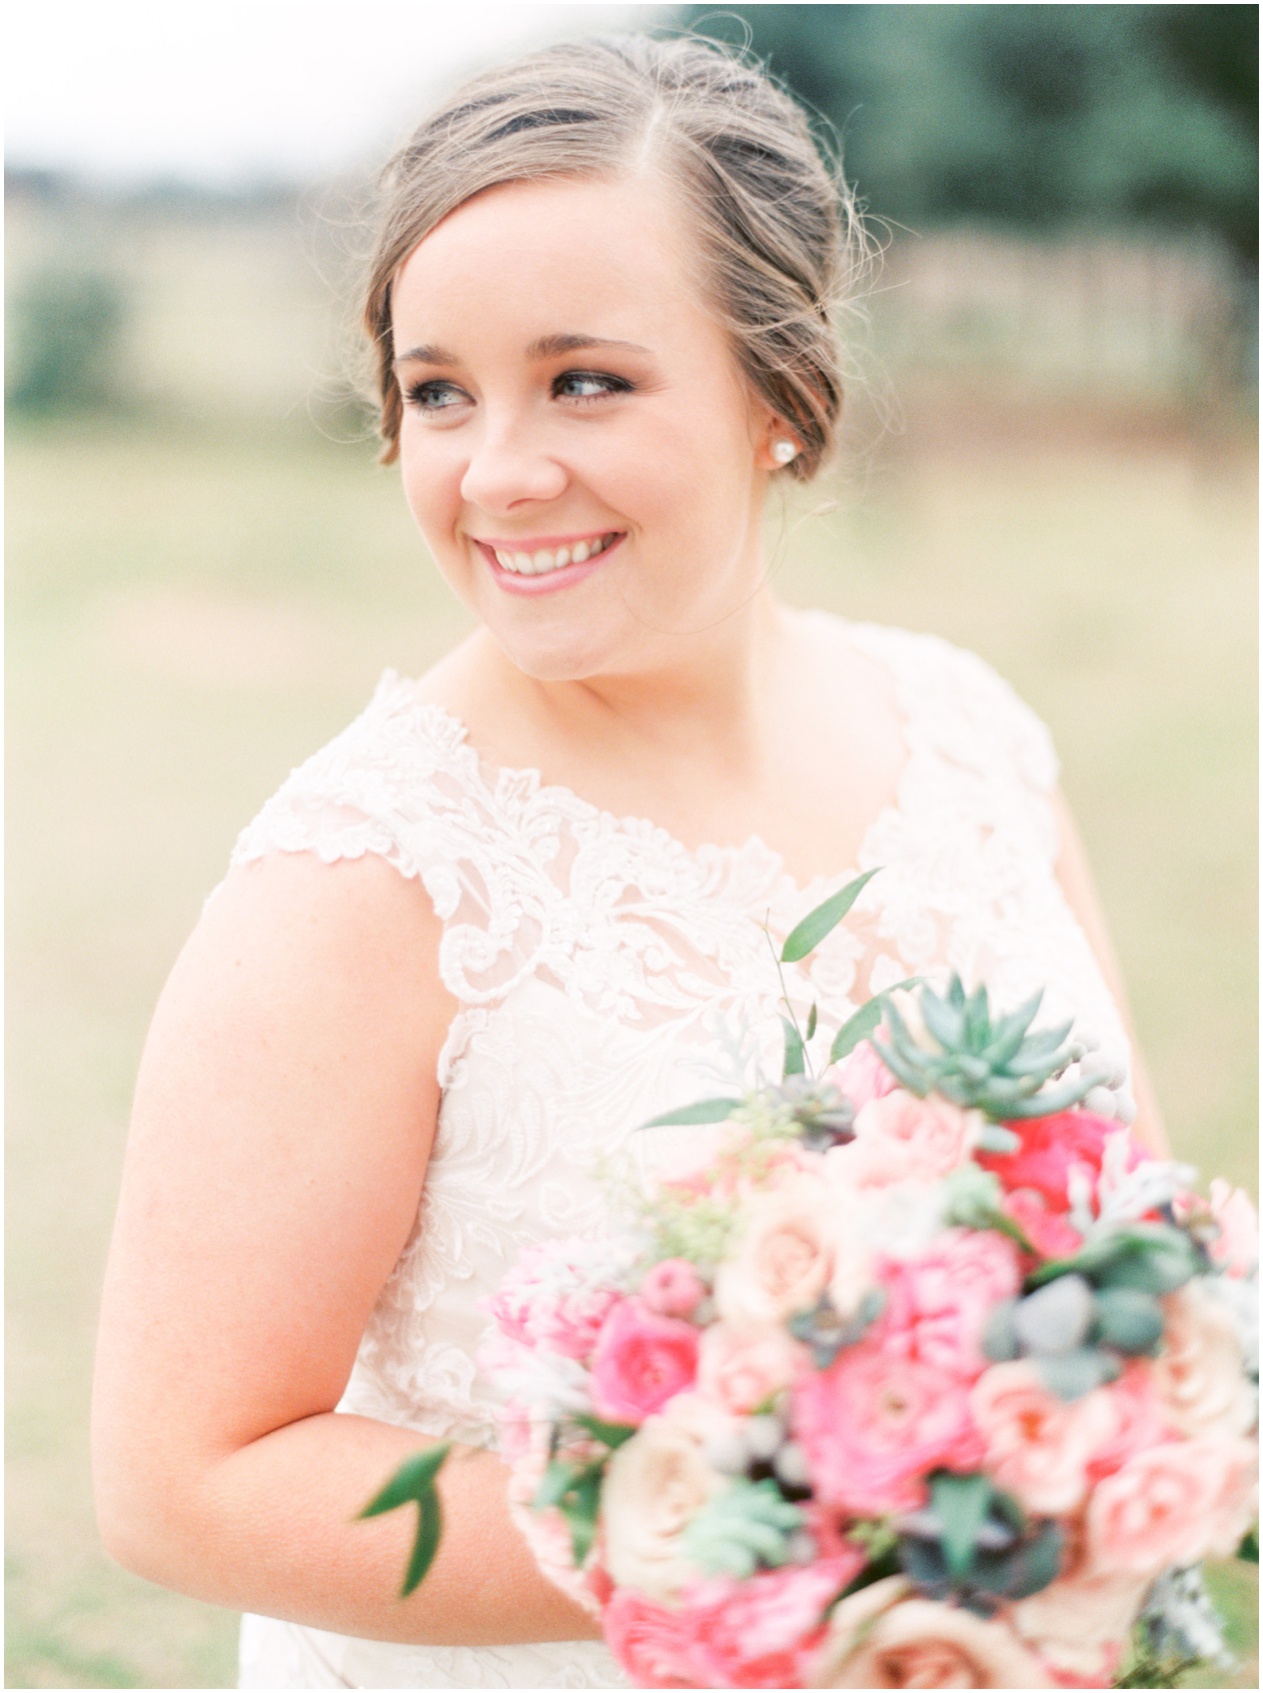 Sarah Best Photography - Claire's Bridals - The Amish Barn at Edge-23_STP.jpg